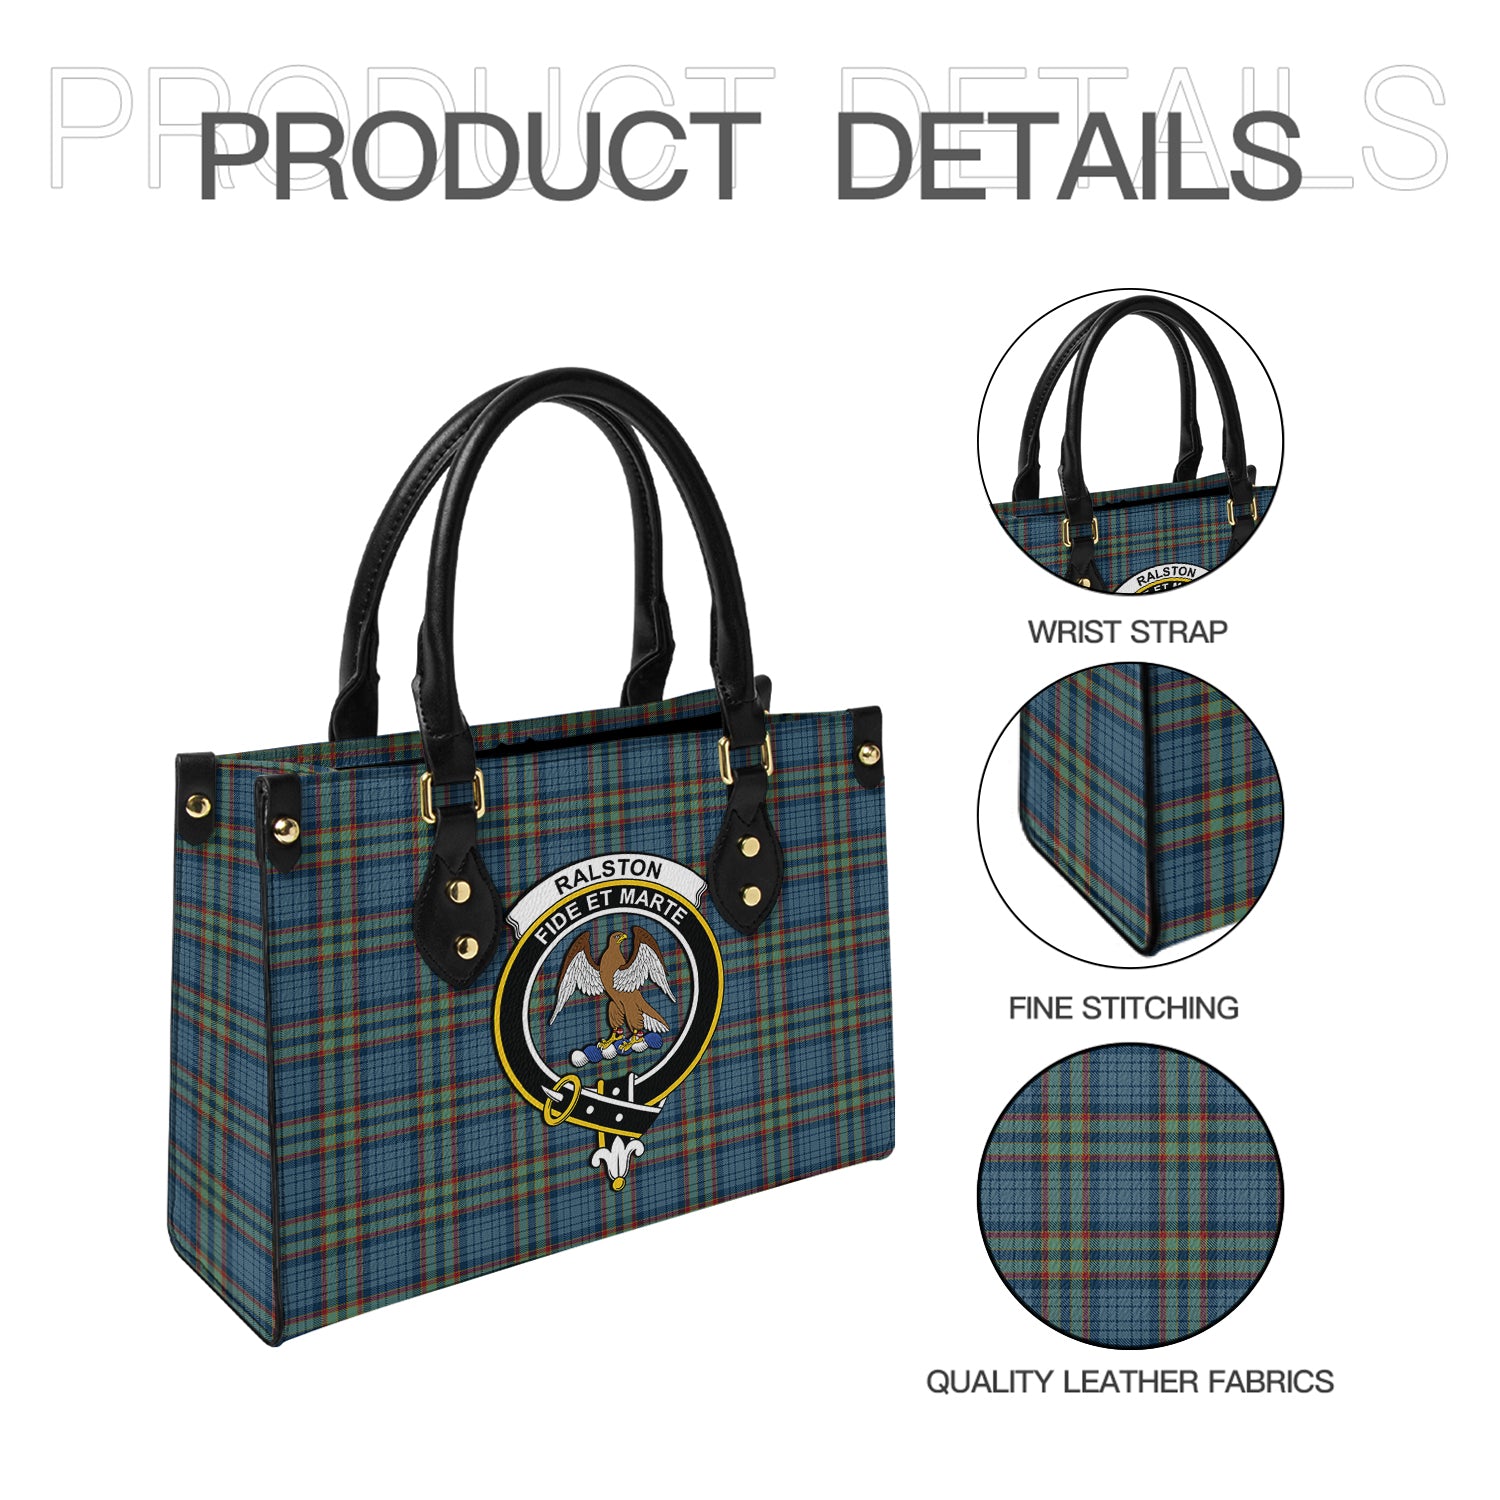 ralston-uk-tartan-leather-bag-with-family-crest